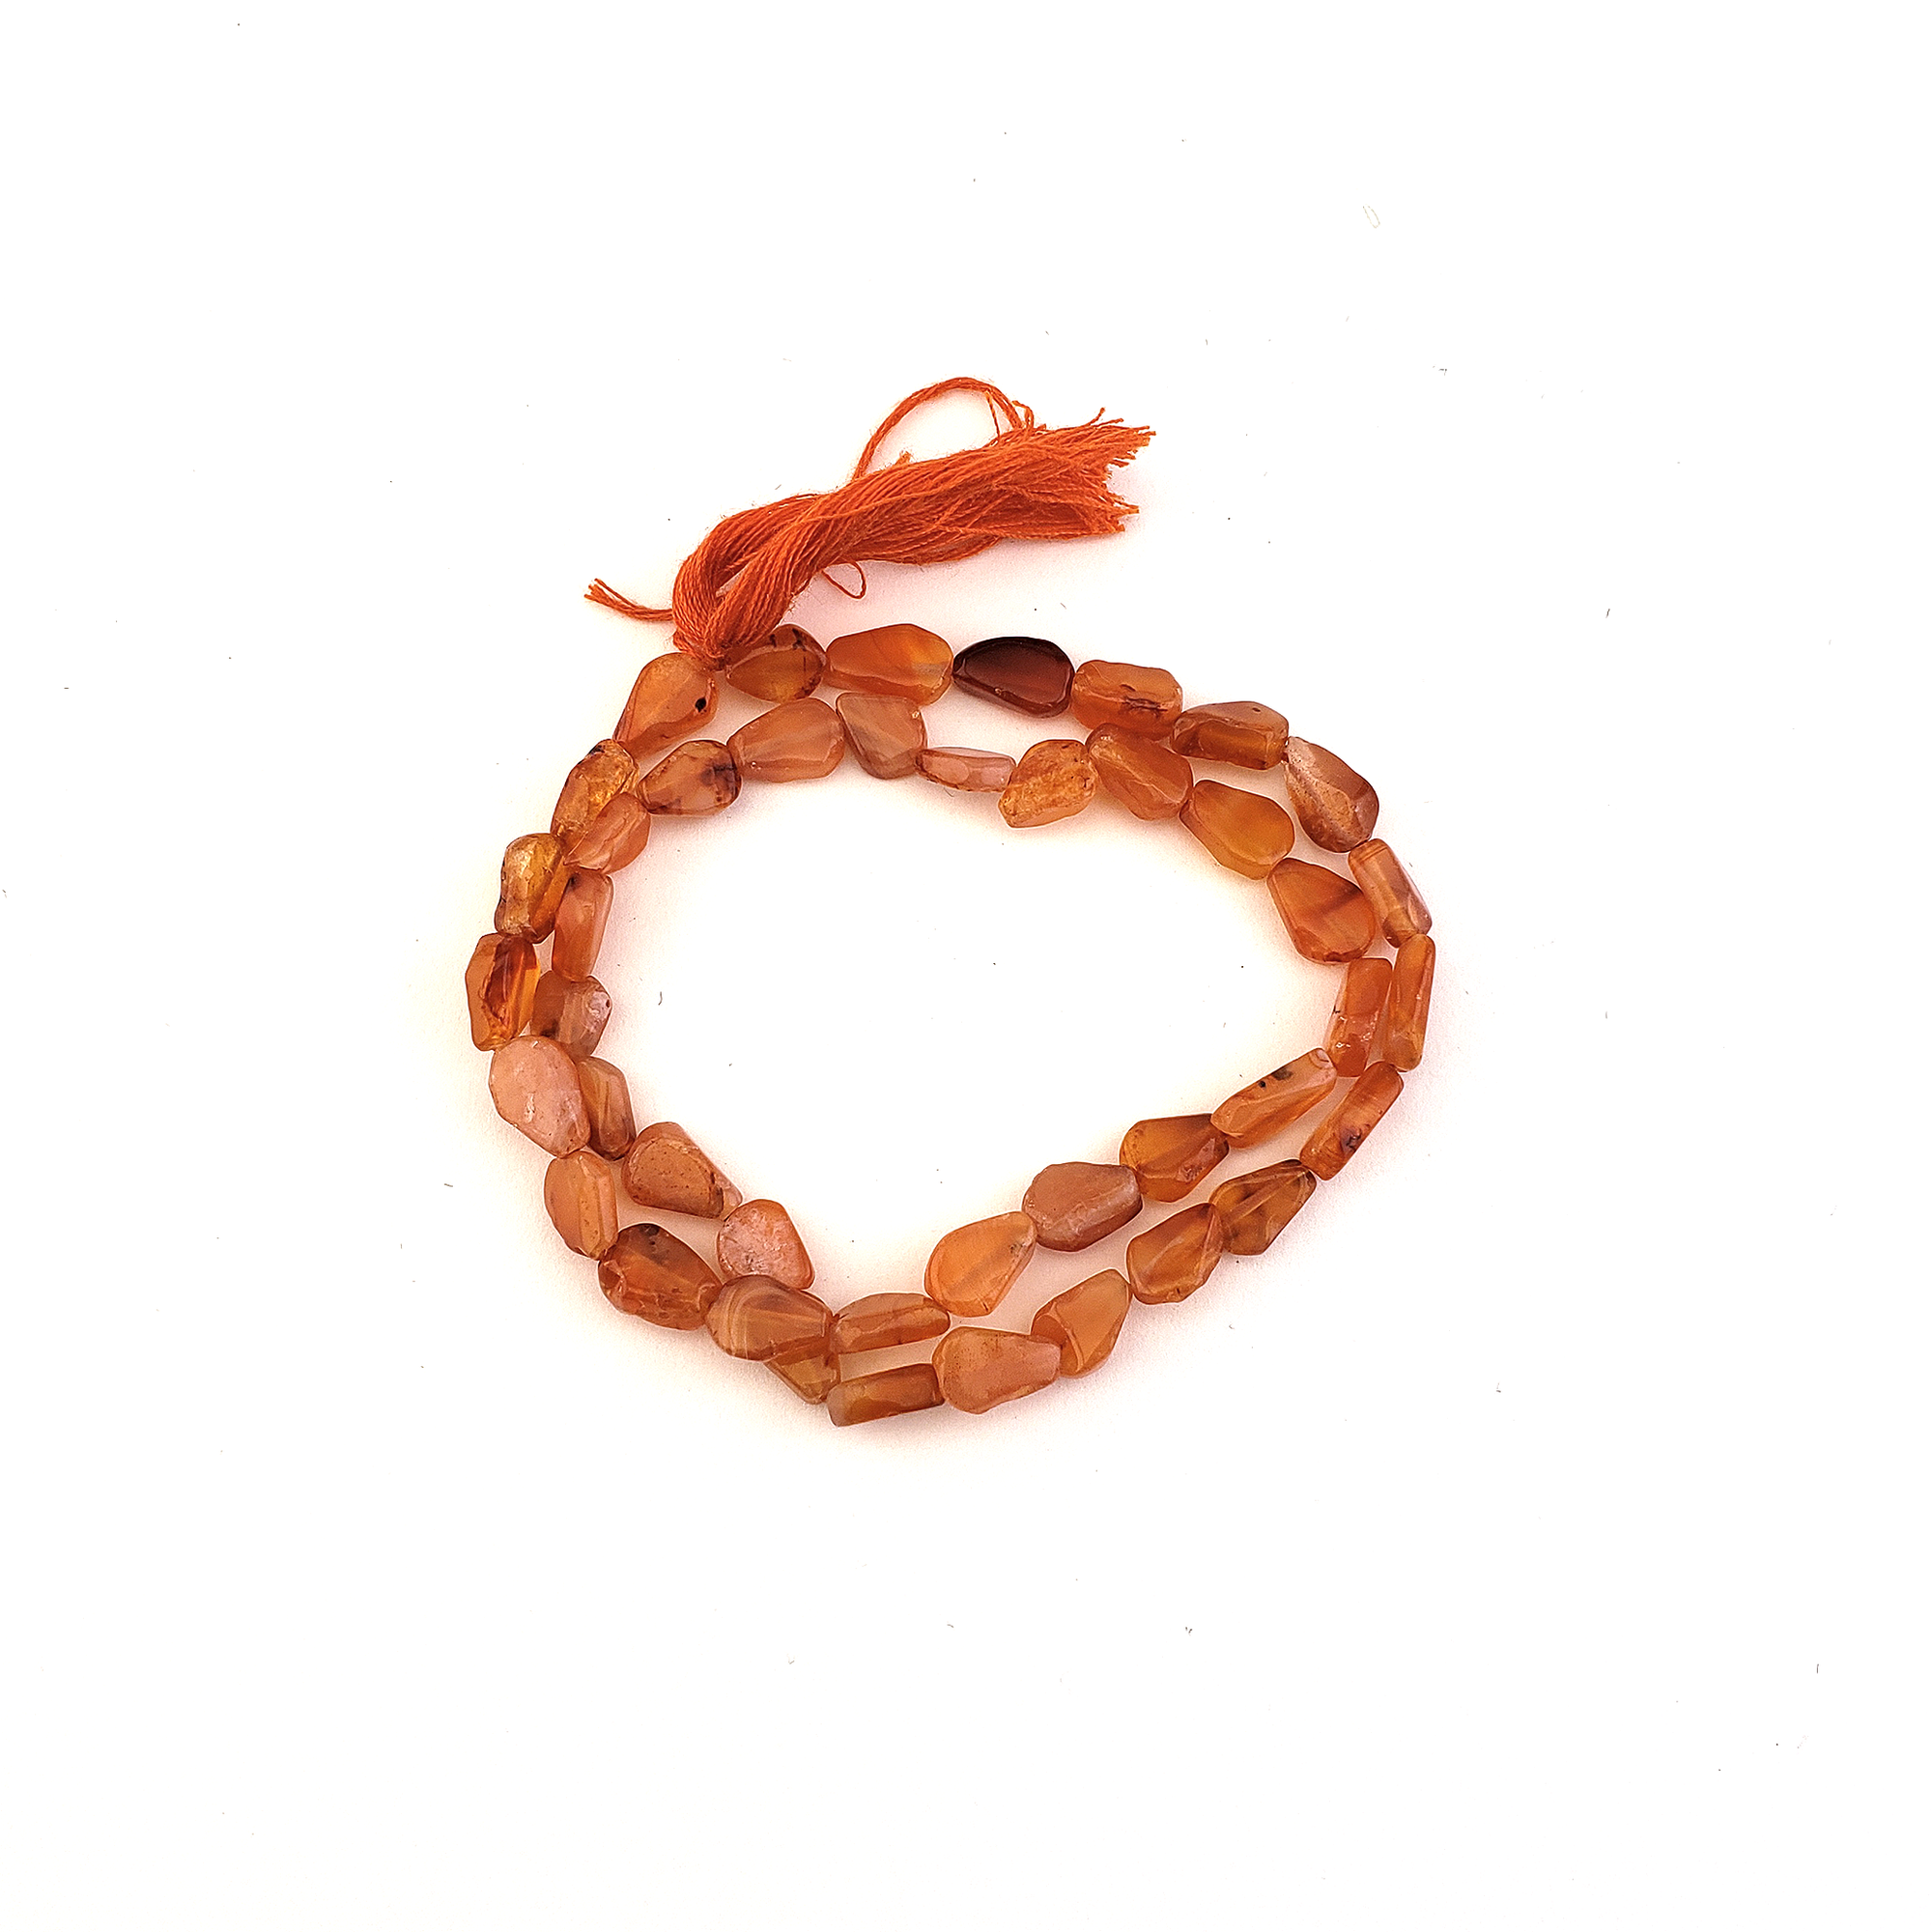 Carnelian Natural Crystal Beads Strand | One Strand of Carnelian Chip Beads - On White Background